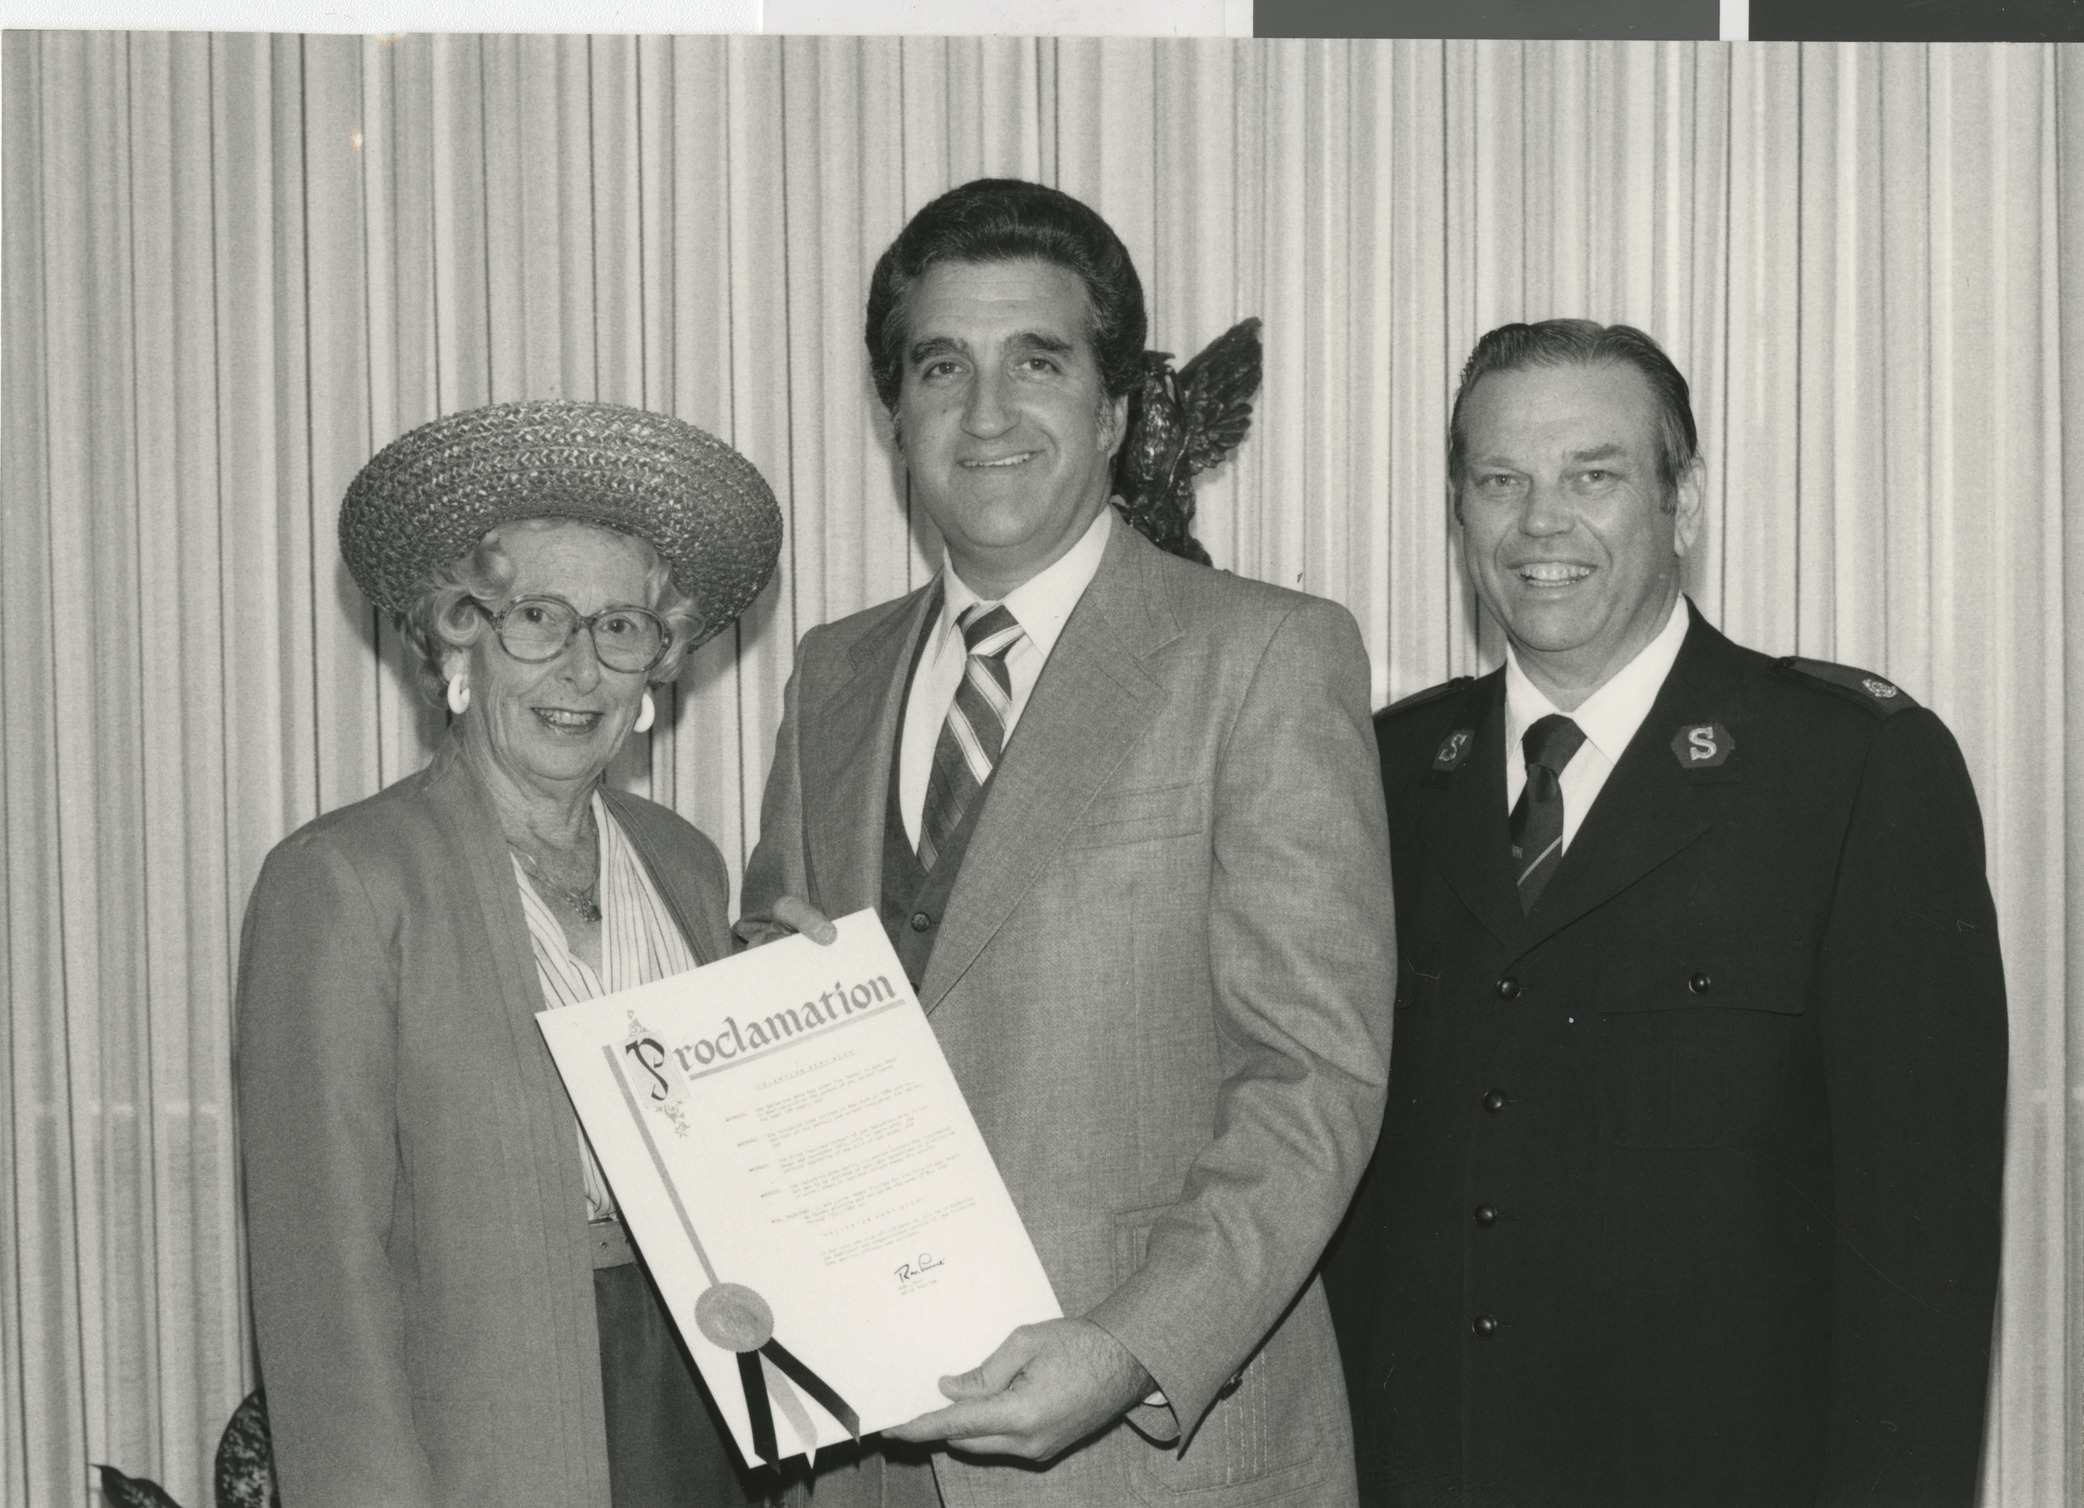 Photograph of Ron Lurie presenting a Proclamation, circa 1978